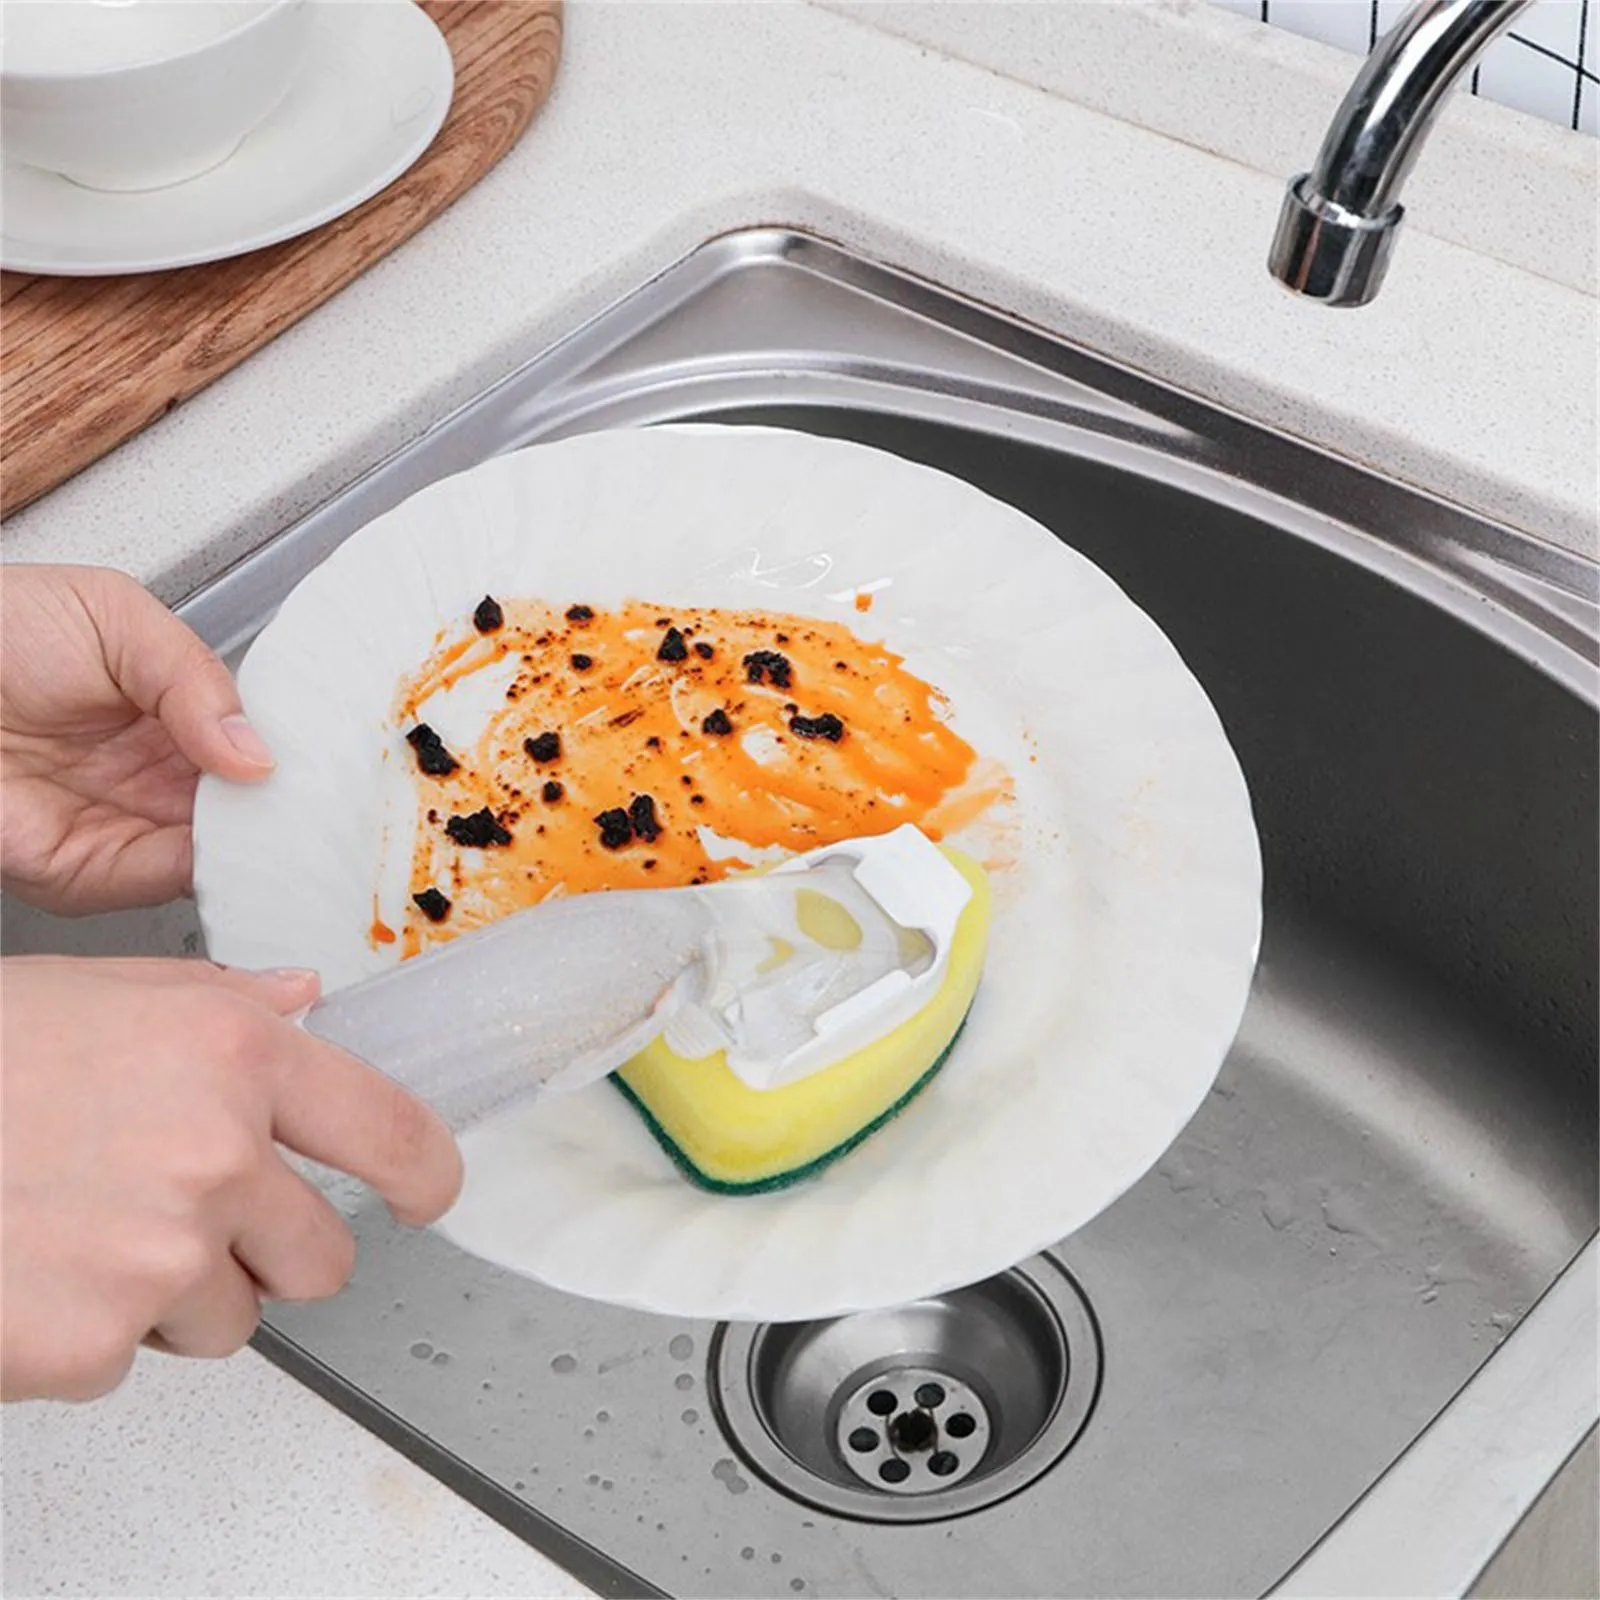 18 Pieces Dish Wand Refills Replacement Sponge Heads Scouring Scrubber Pads  Heavy Duty Dish Wand Sponge for Kitchen Sink Clea - AliExpress